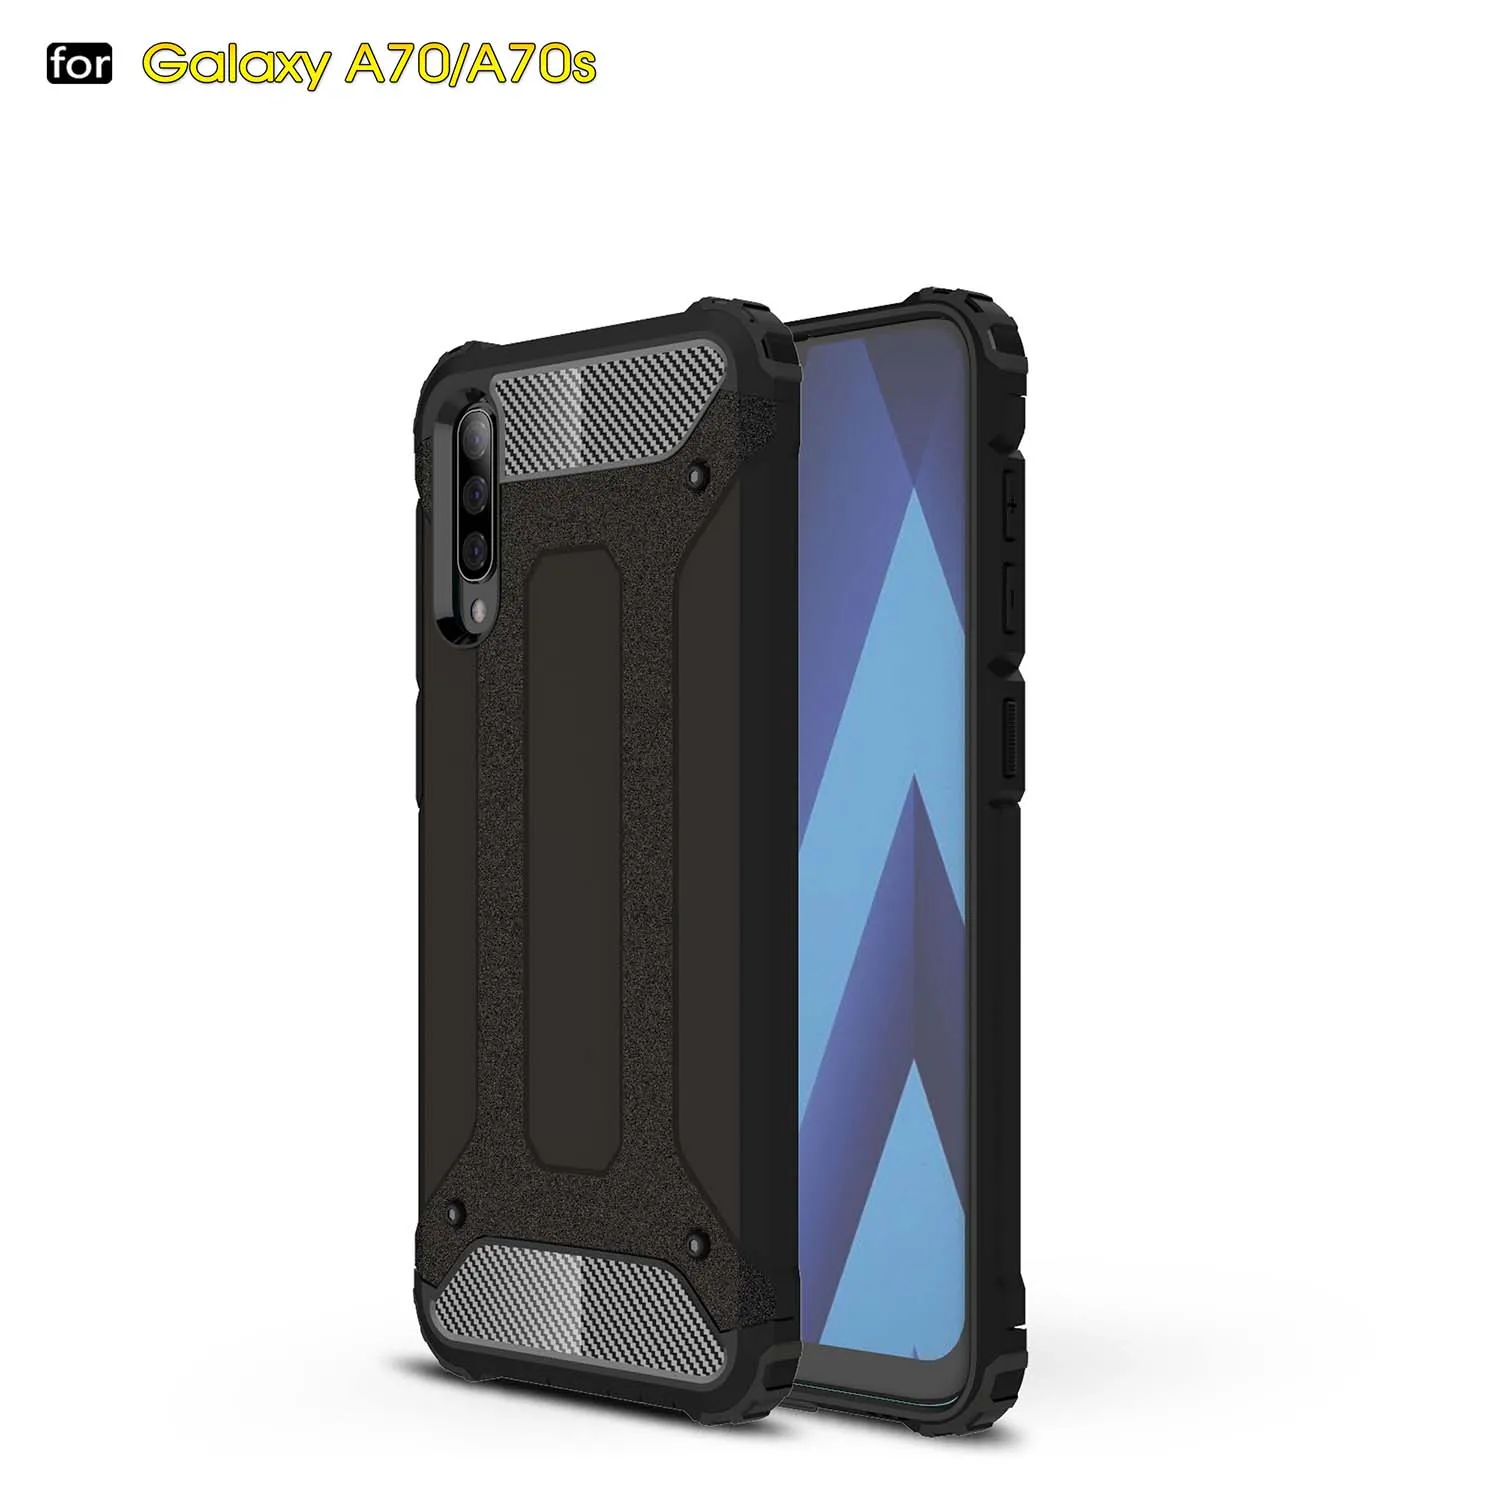 

Shockproof Case For Samsung Galaxy A90S A70S A70E A70 A60 A50 A50S A30 A30S A40 A20 A10 A9S A8 A5 2018 Rugged Layer Armor Shell